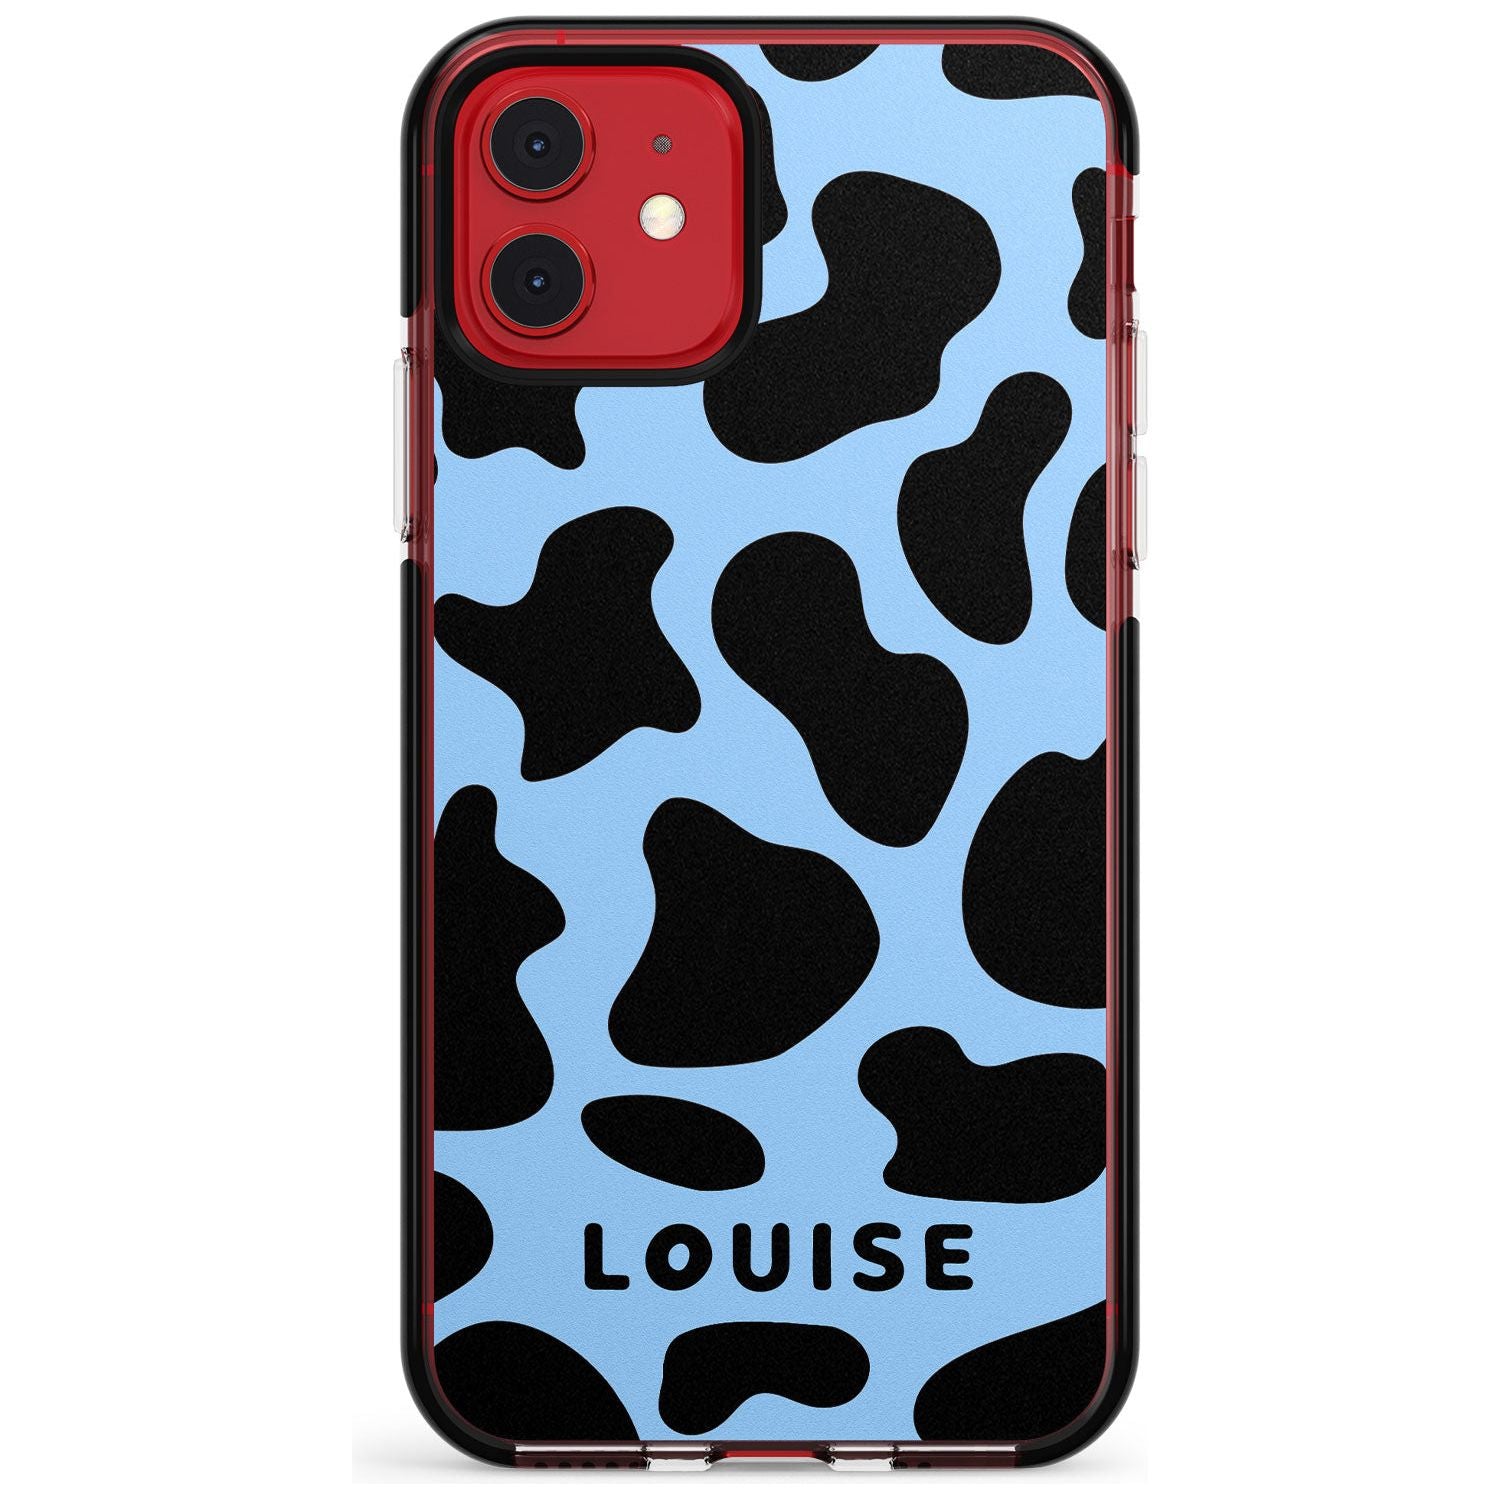 Personalised Blue and Black Cow Print Black Impact Phone Case for iPhone 11 Pro Max